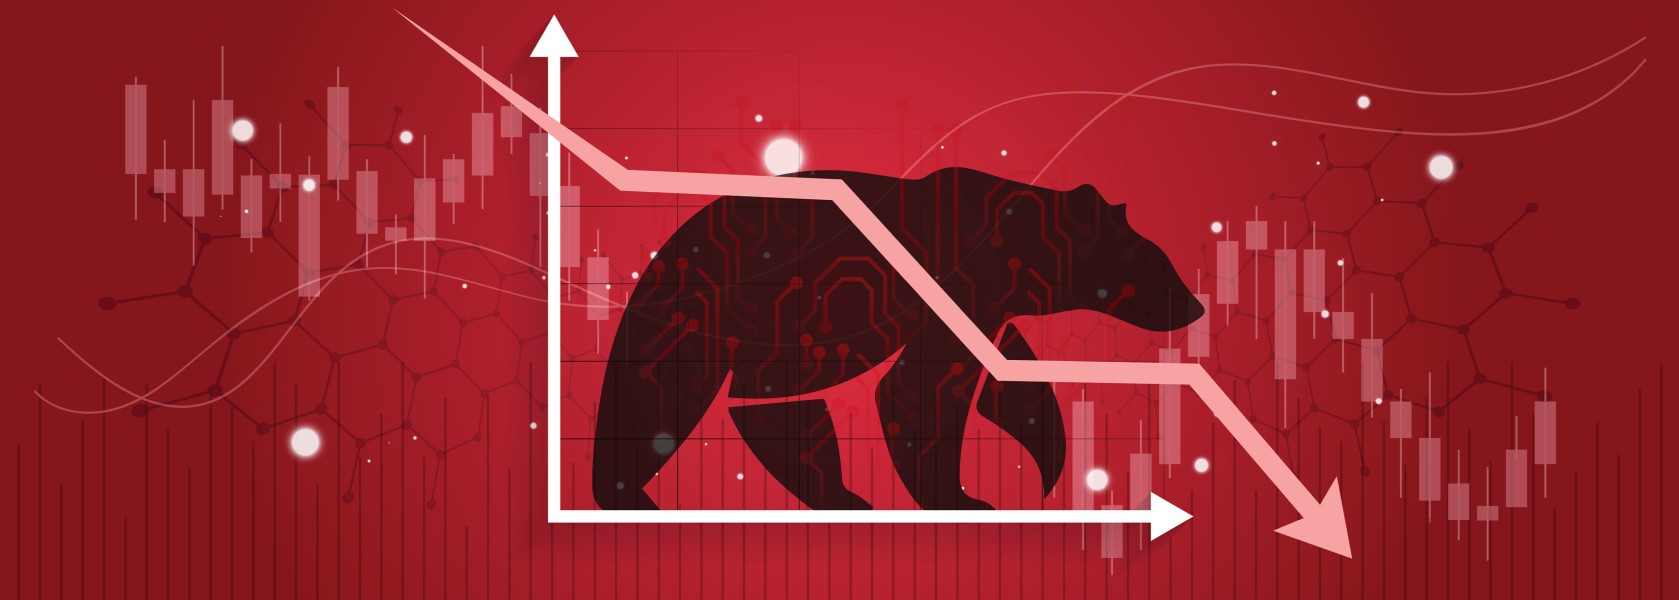 crypto bear on red background